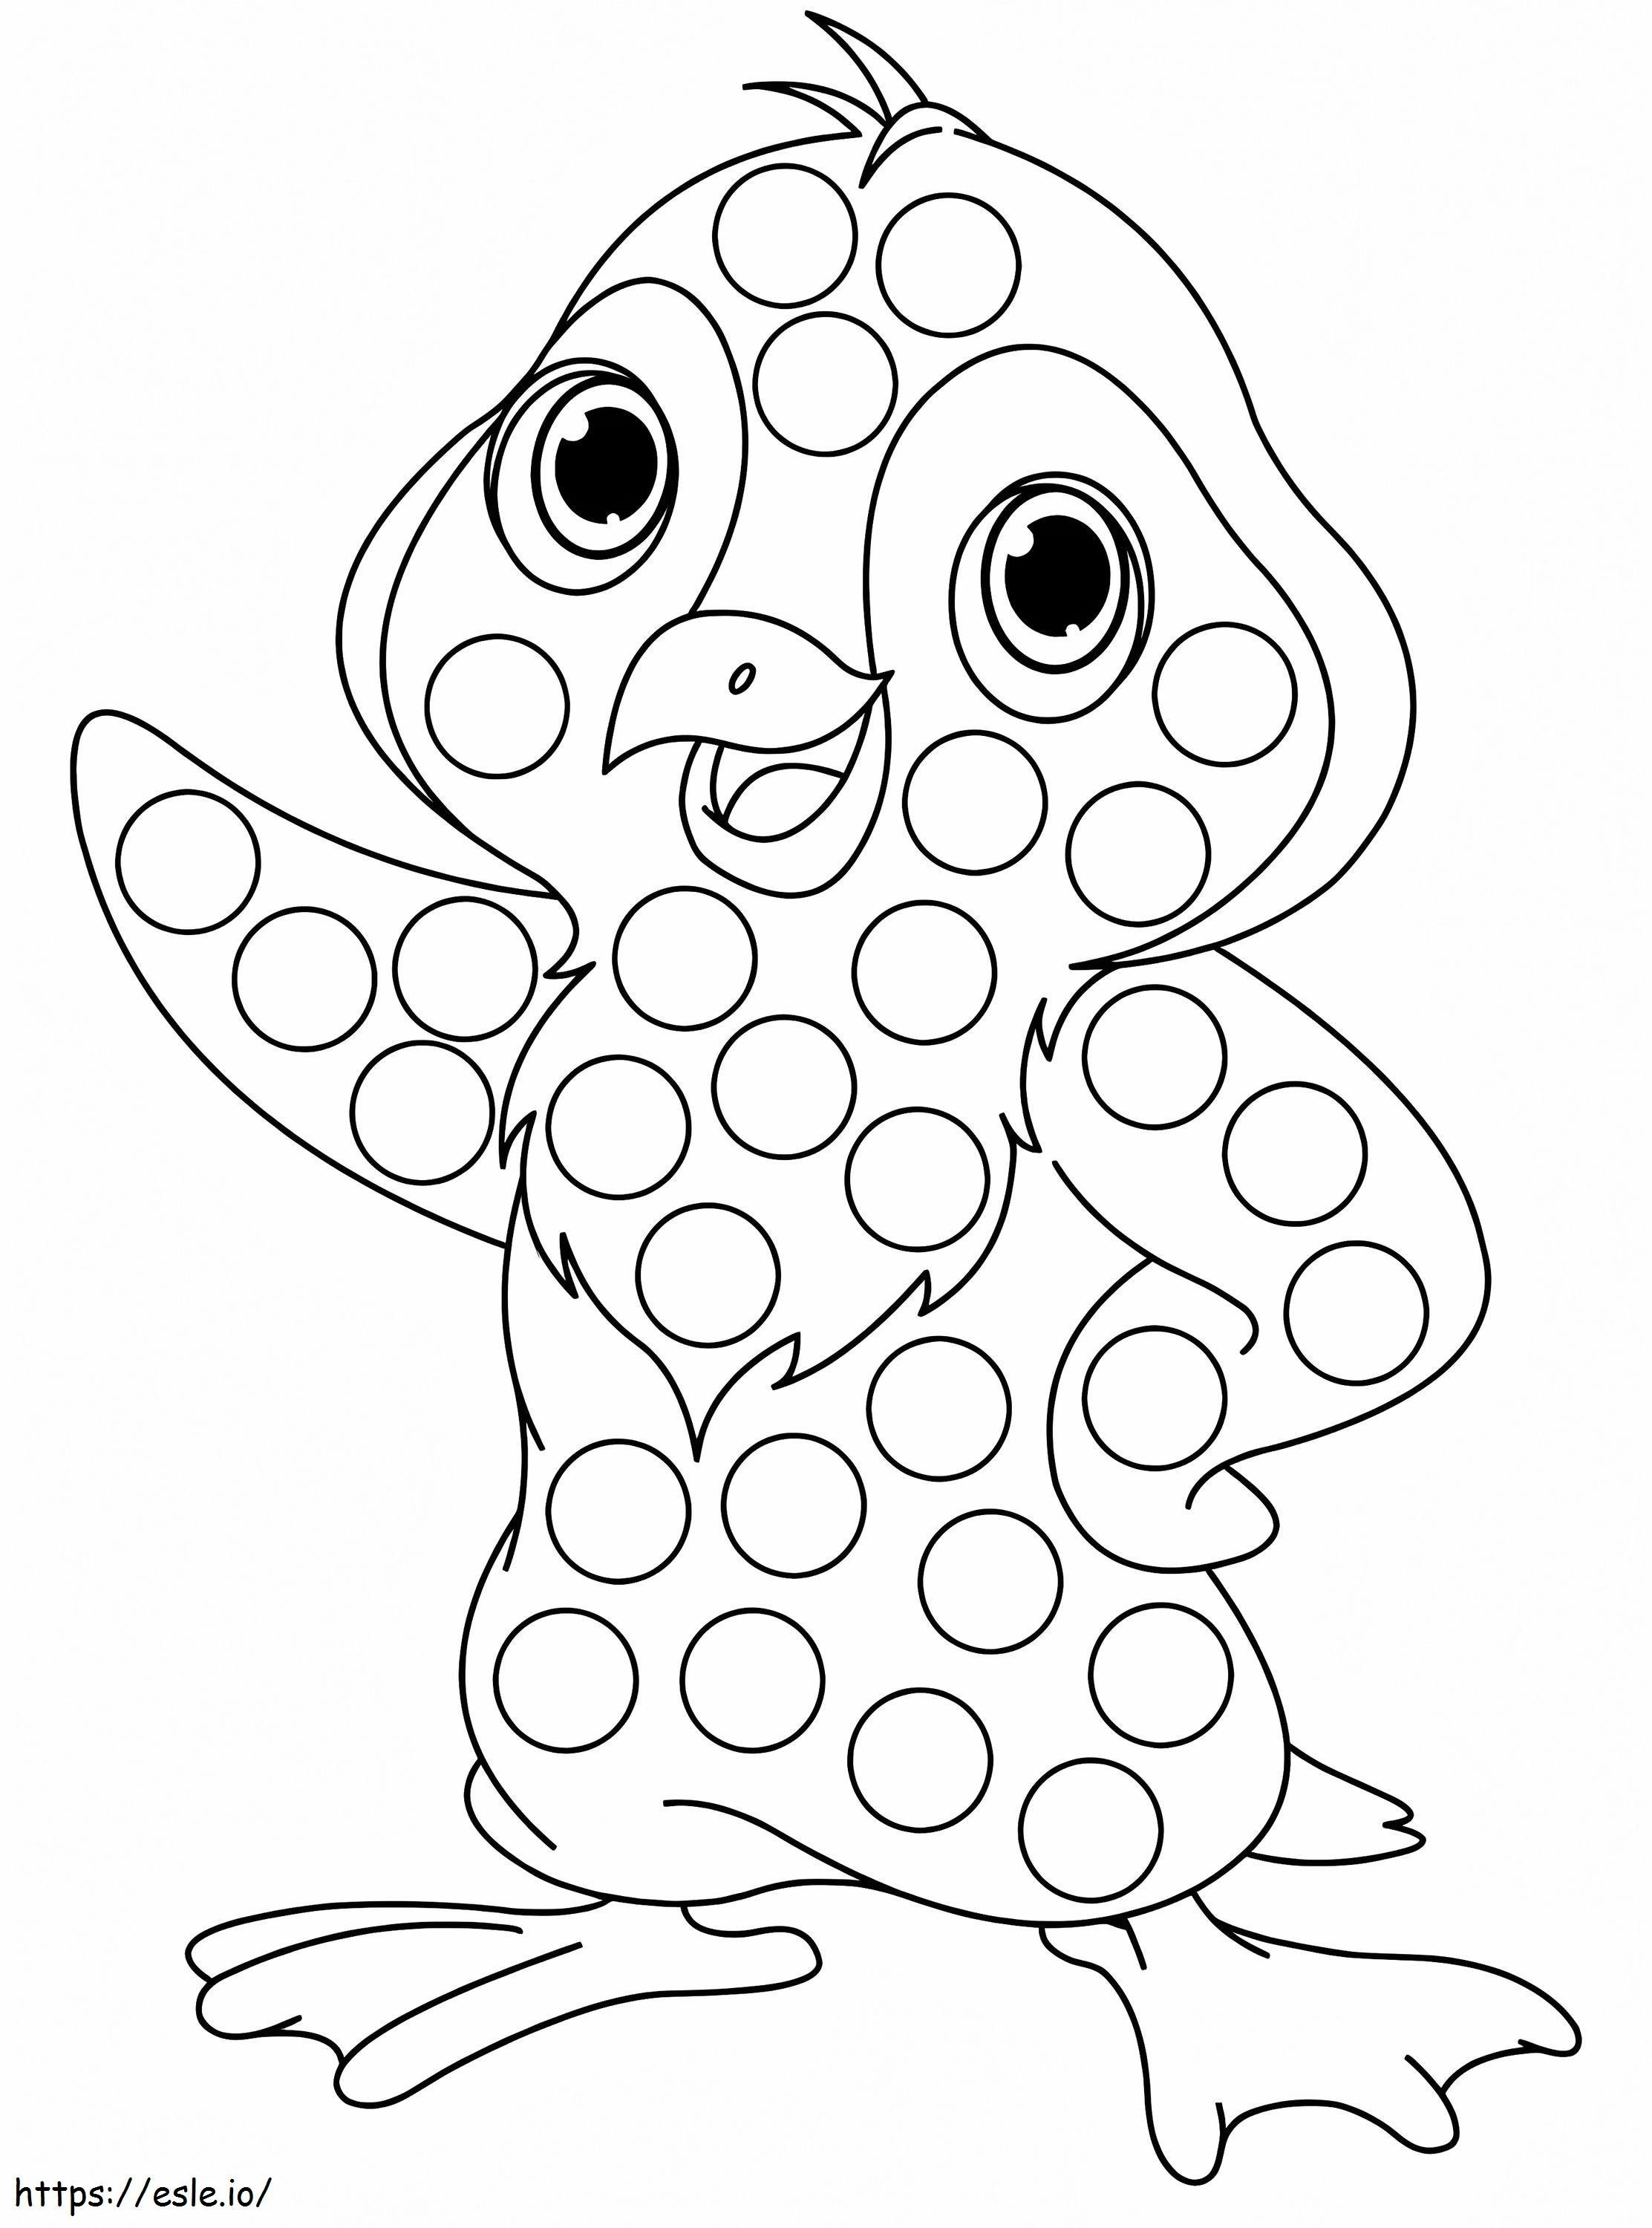 Penguin Dot Marker coloring page